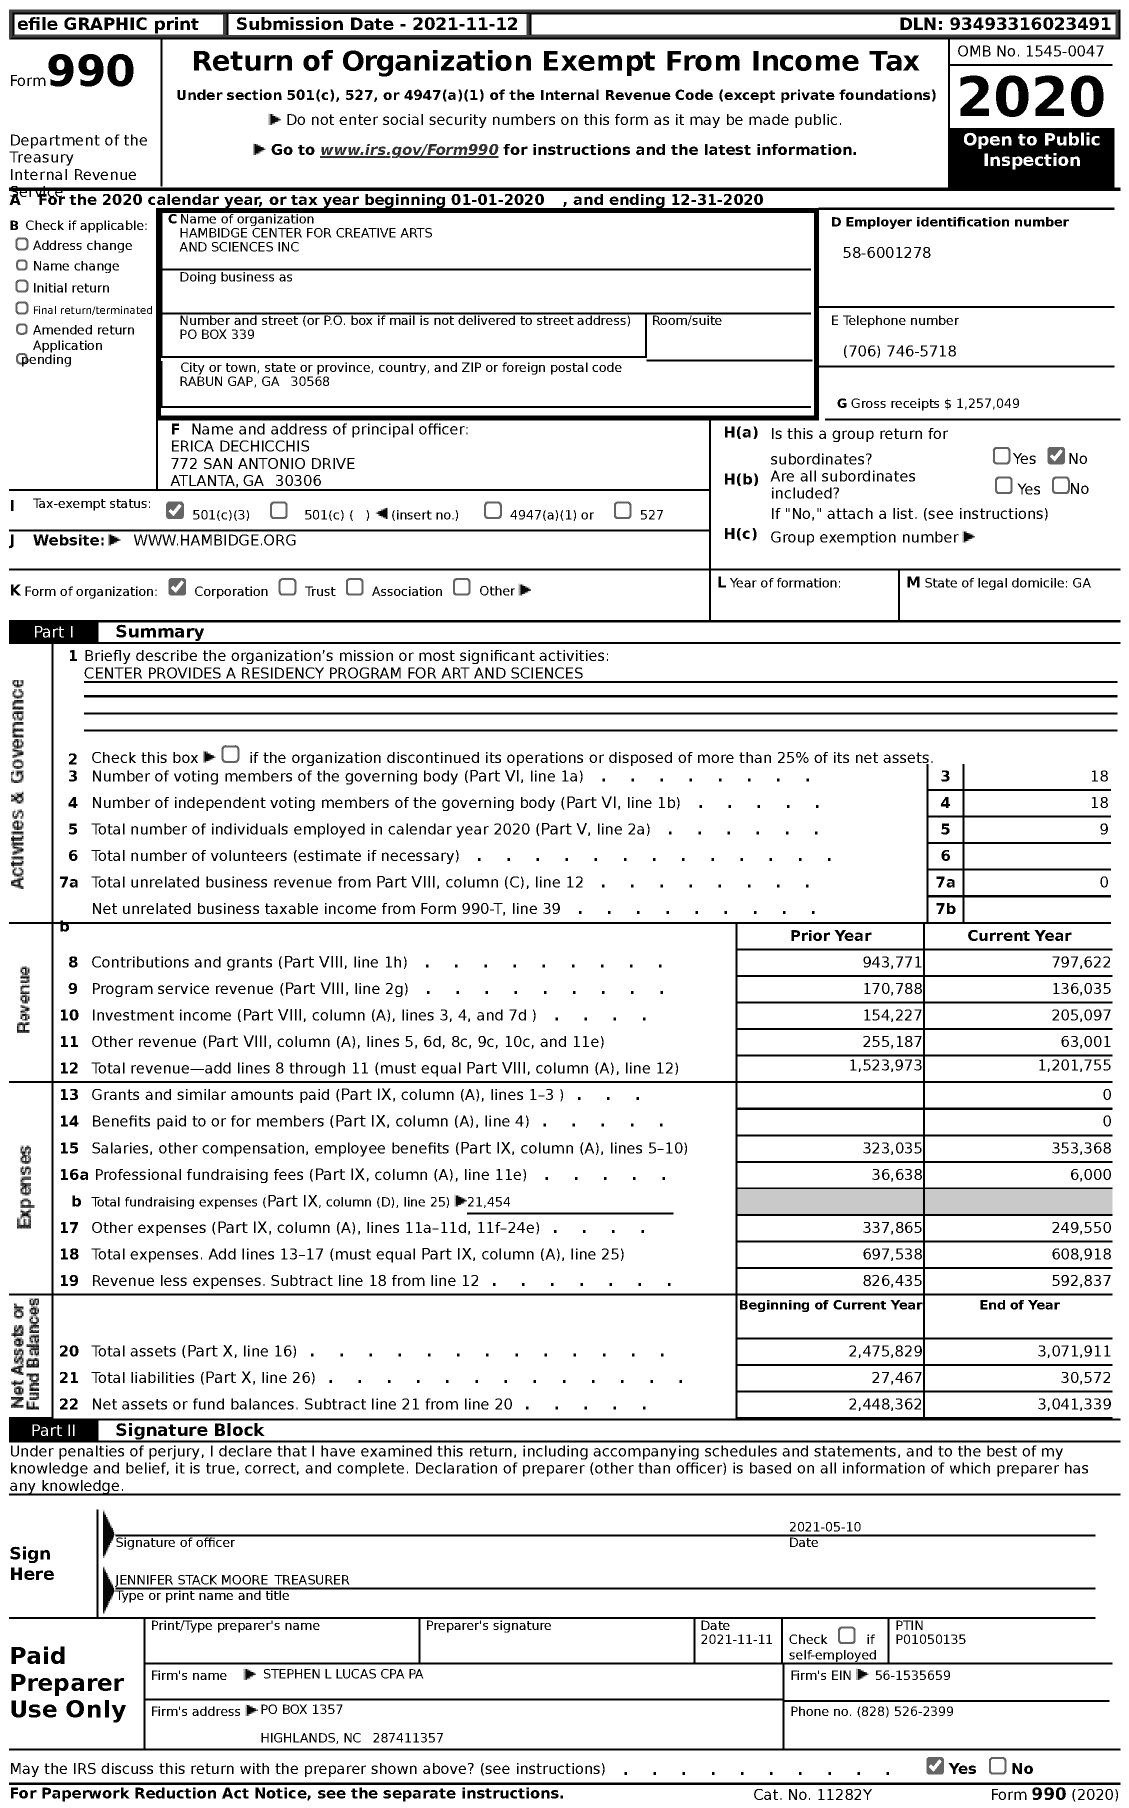 Image of first page of 2020 Form 990 for Hambidge Center for Creative Arts and Sciences